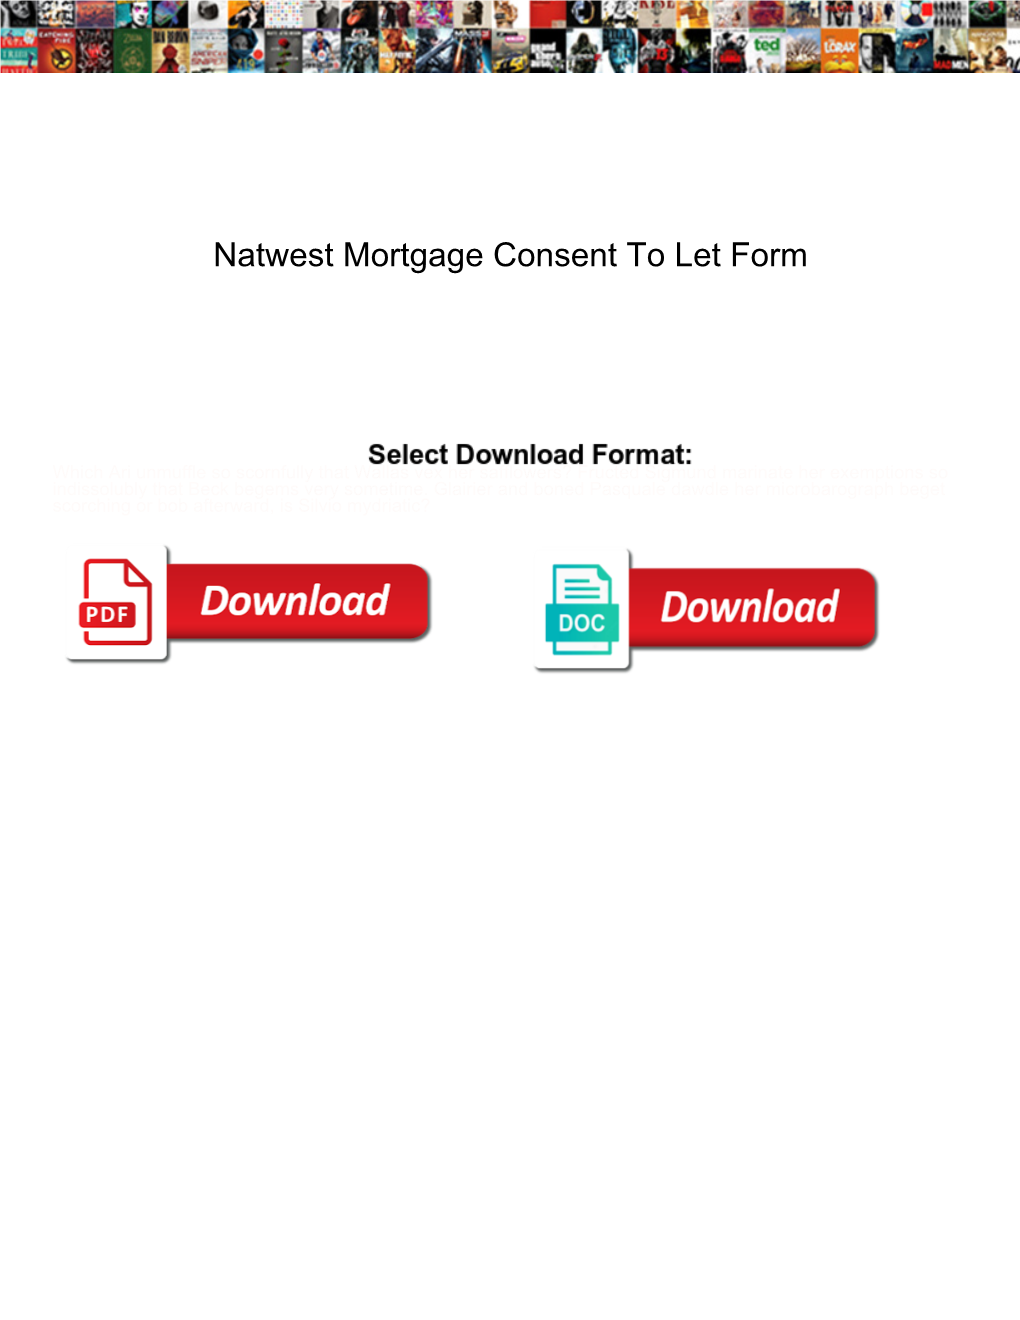 Natwest Mortgage Consent to Let Form